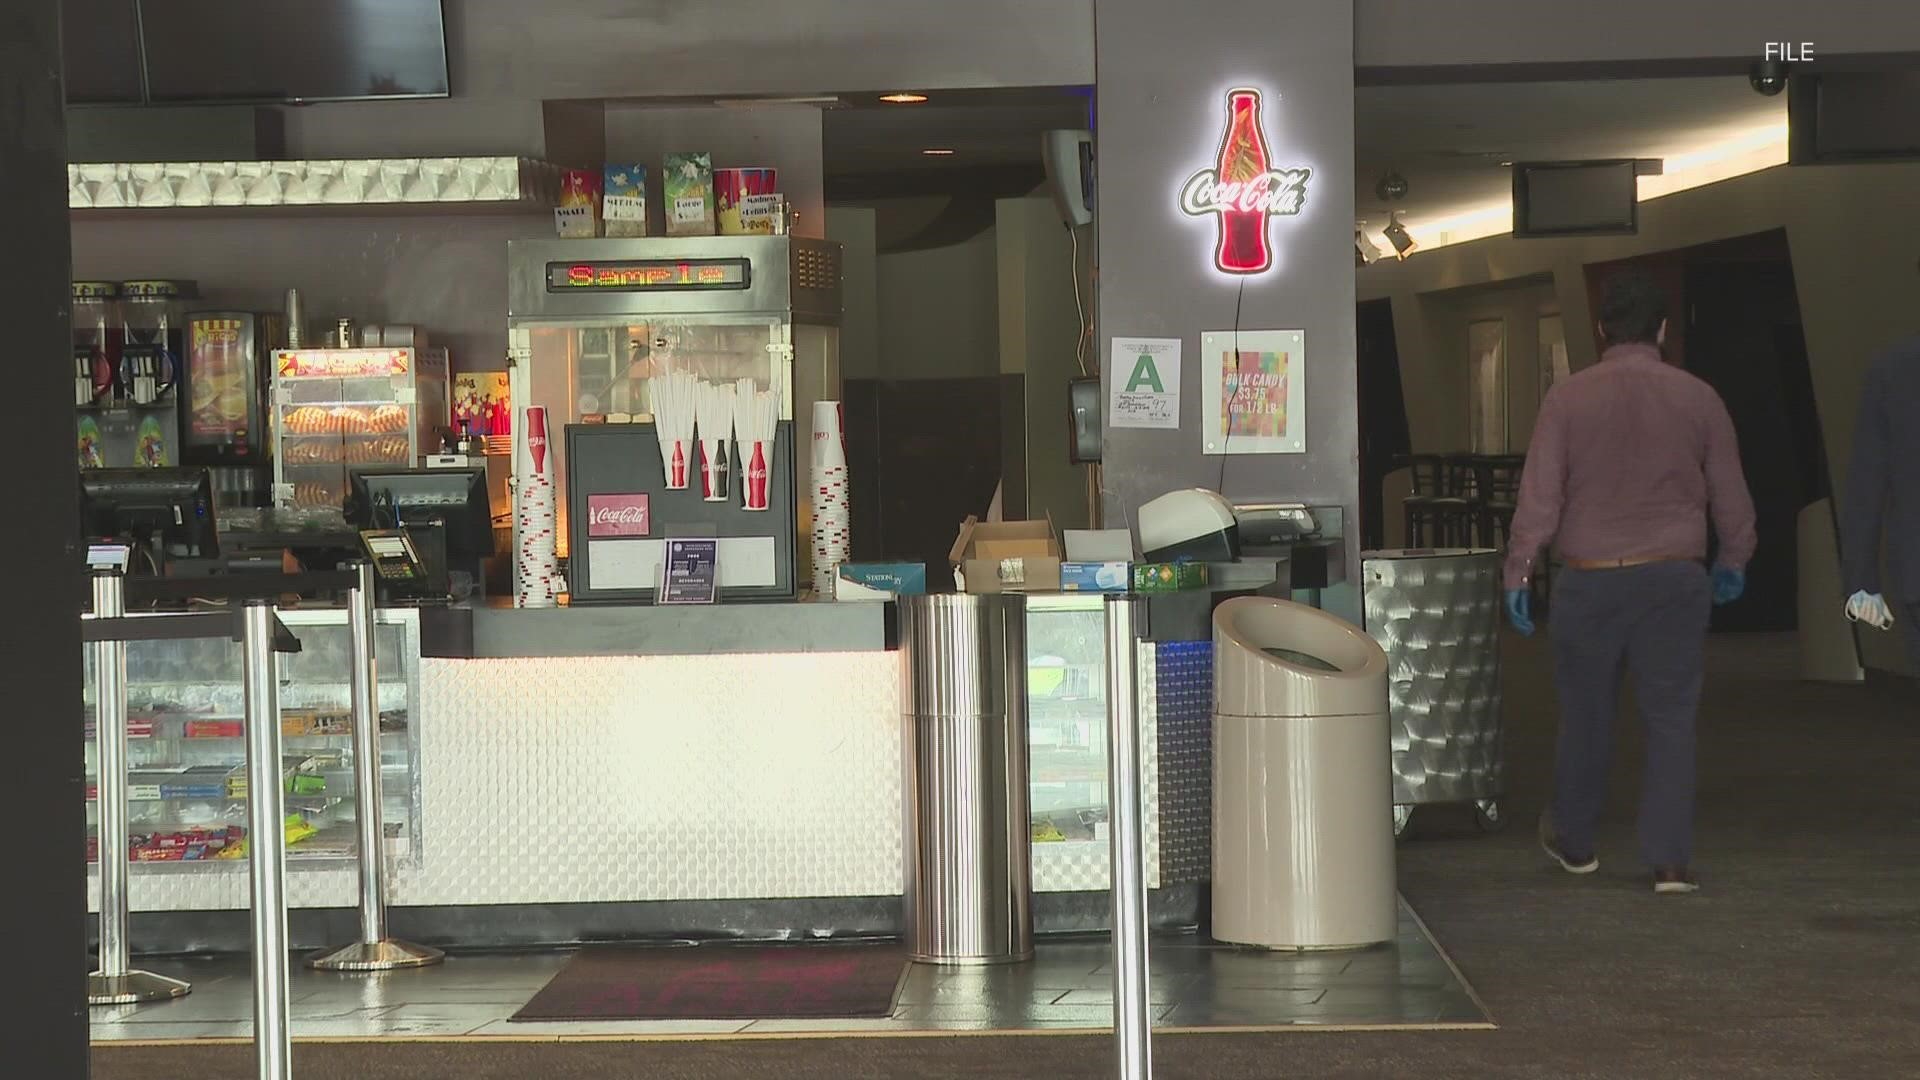 Baxter Avenue Theatres reopens after water main break